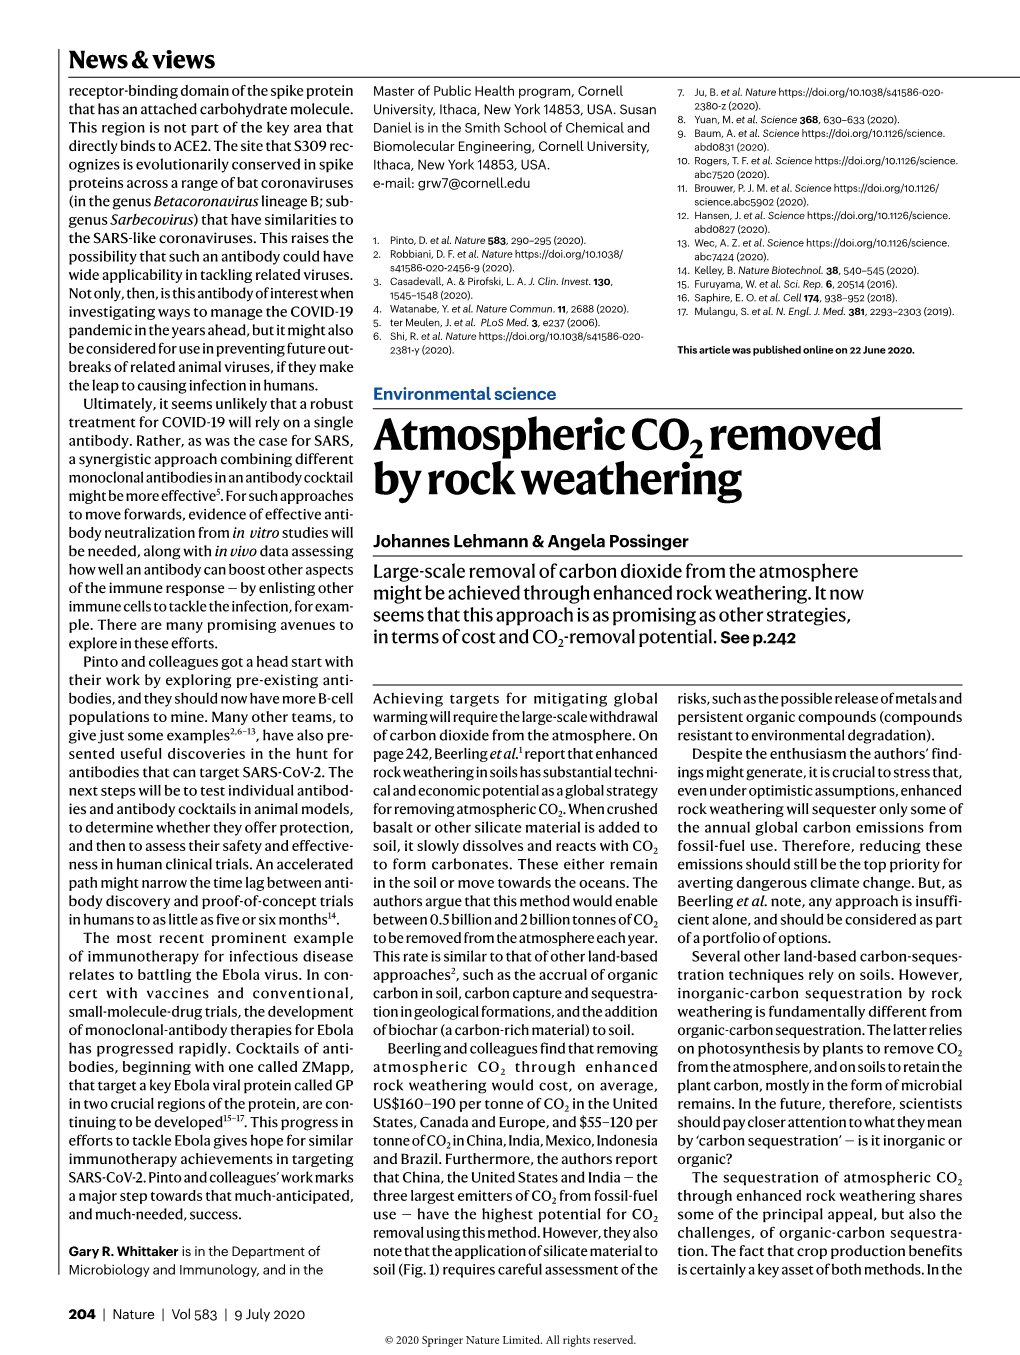 Atmospheric CO2 Removed by Rock Weathering